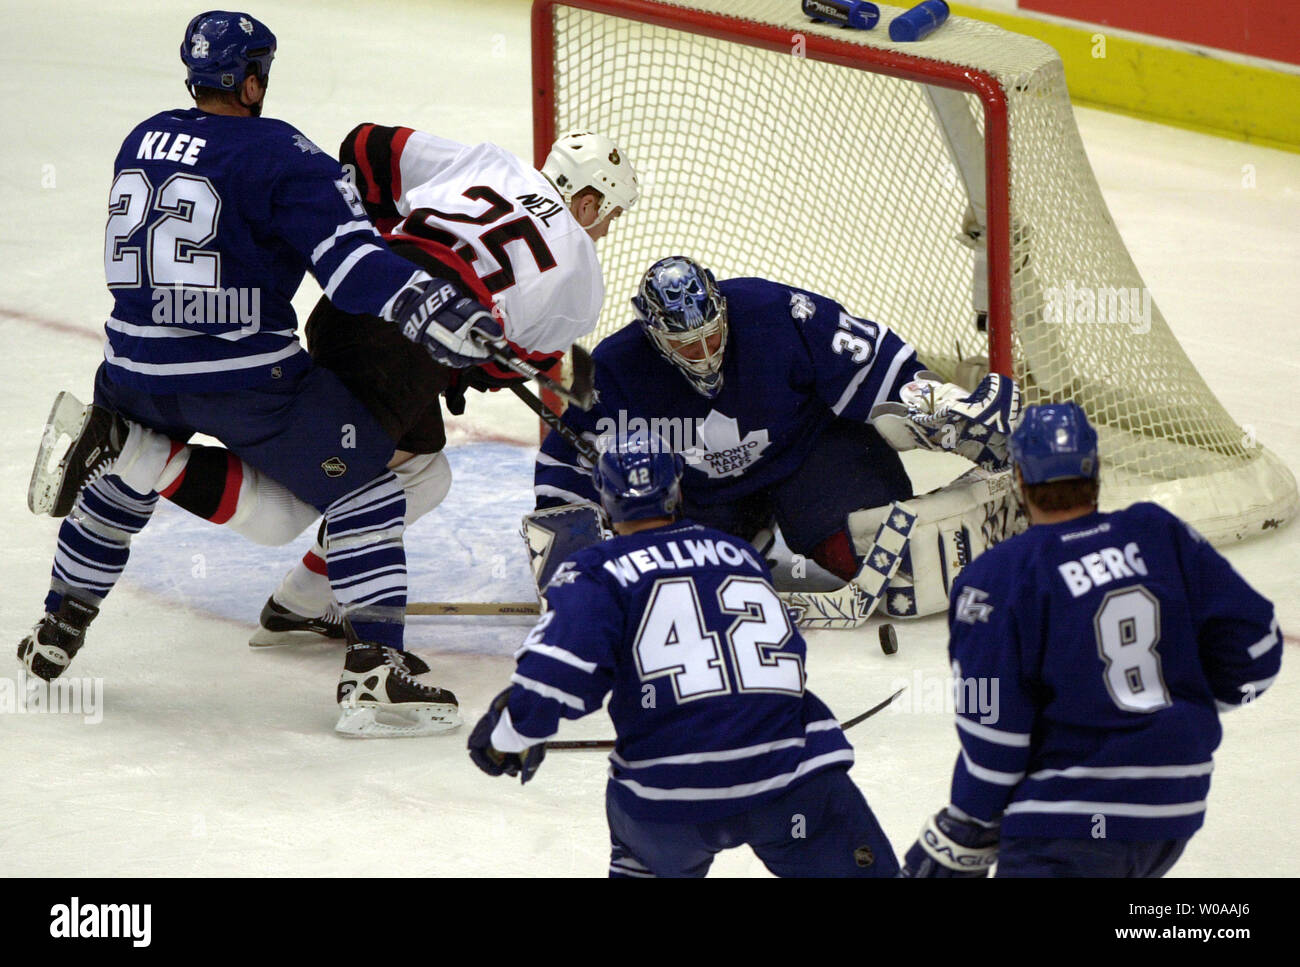 Ottawa Senators' Chris Neil attempts a shot on goal surrounded by Toronto Maple Leafs' Ken Klee, Kyle Wellwood, Aki Berg and goailie Trevor Kidd in first period action at the Air Canada Center in Toronto, Canada on Jan. 8, 2004. (UPI Photo/Christine Chew) Stock Photo